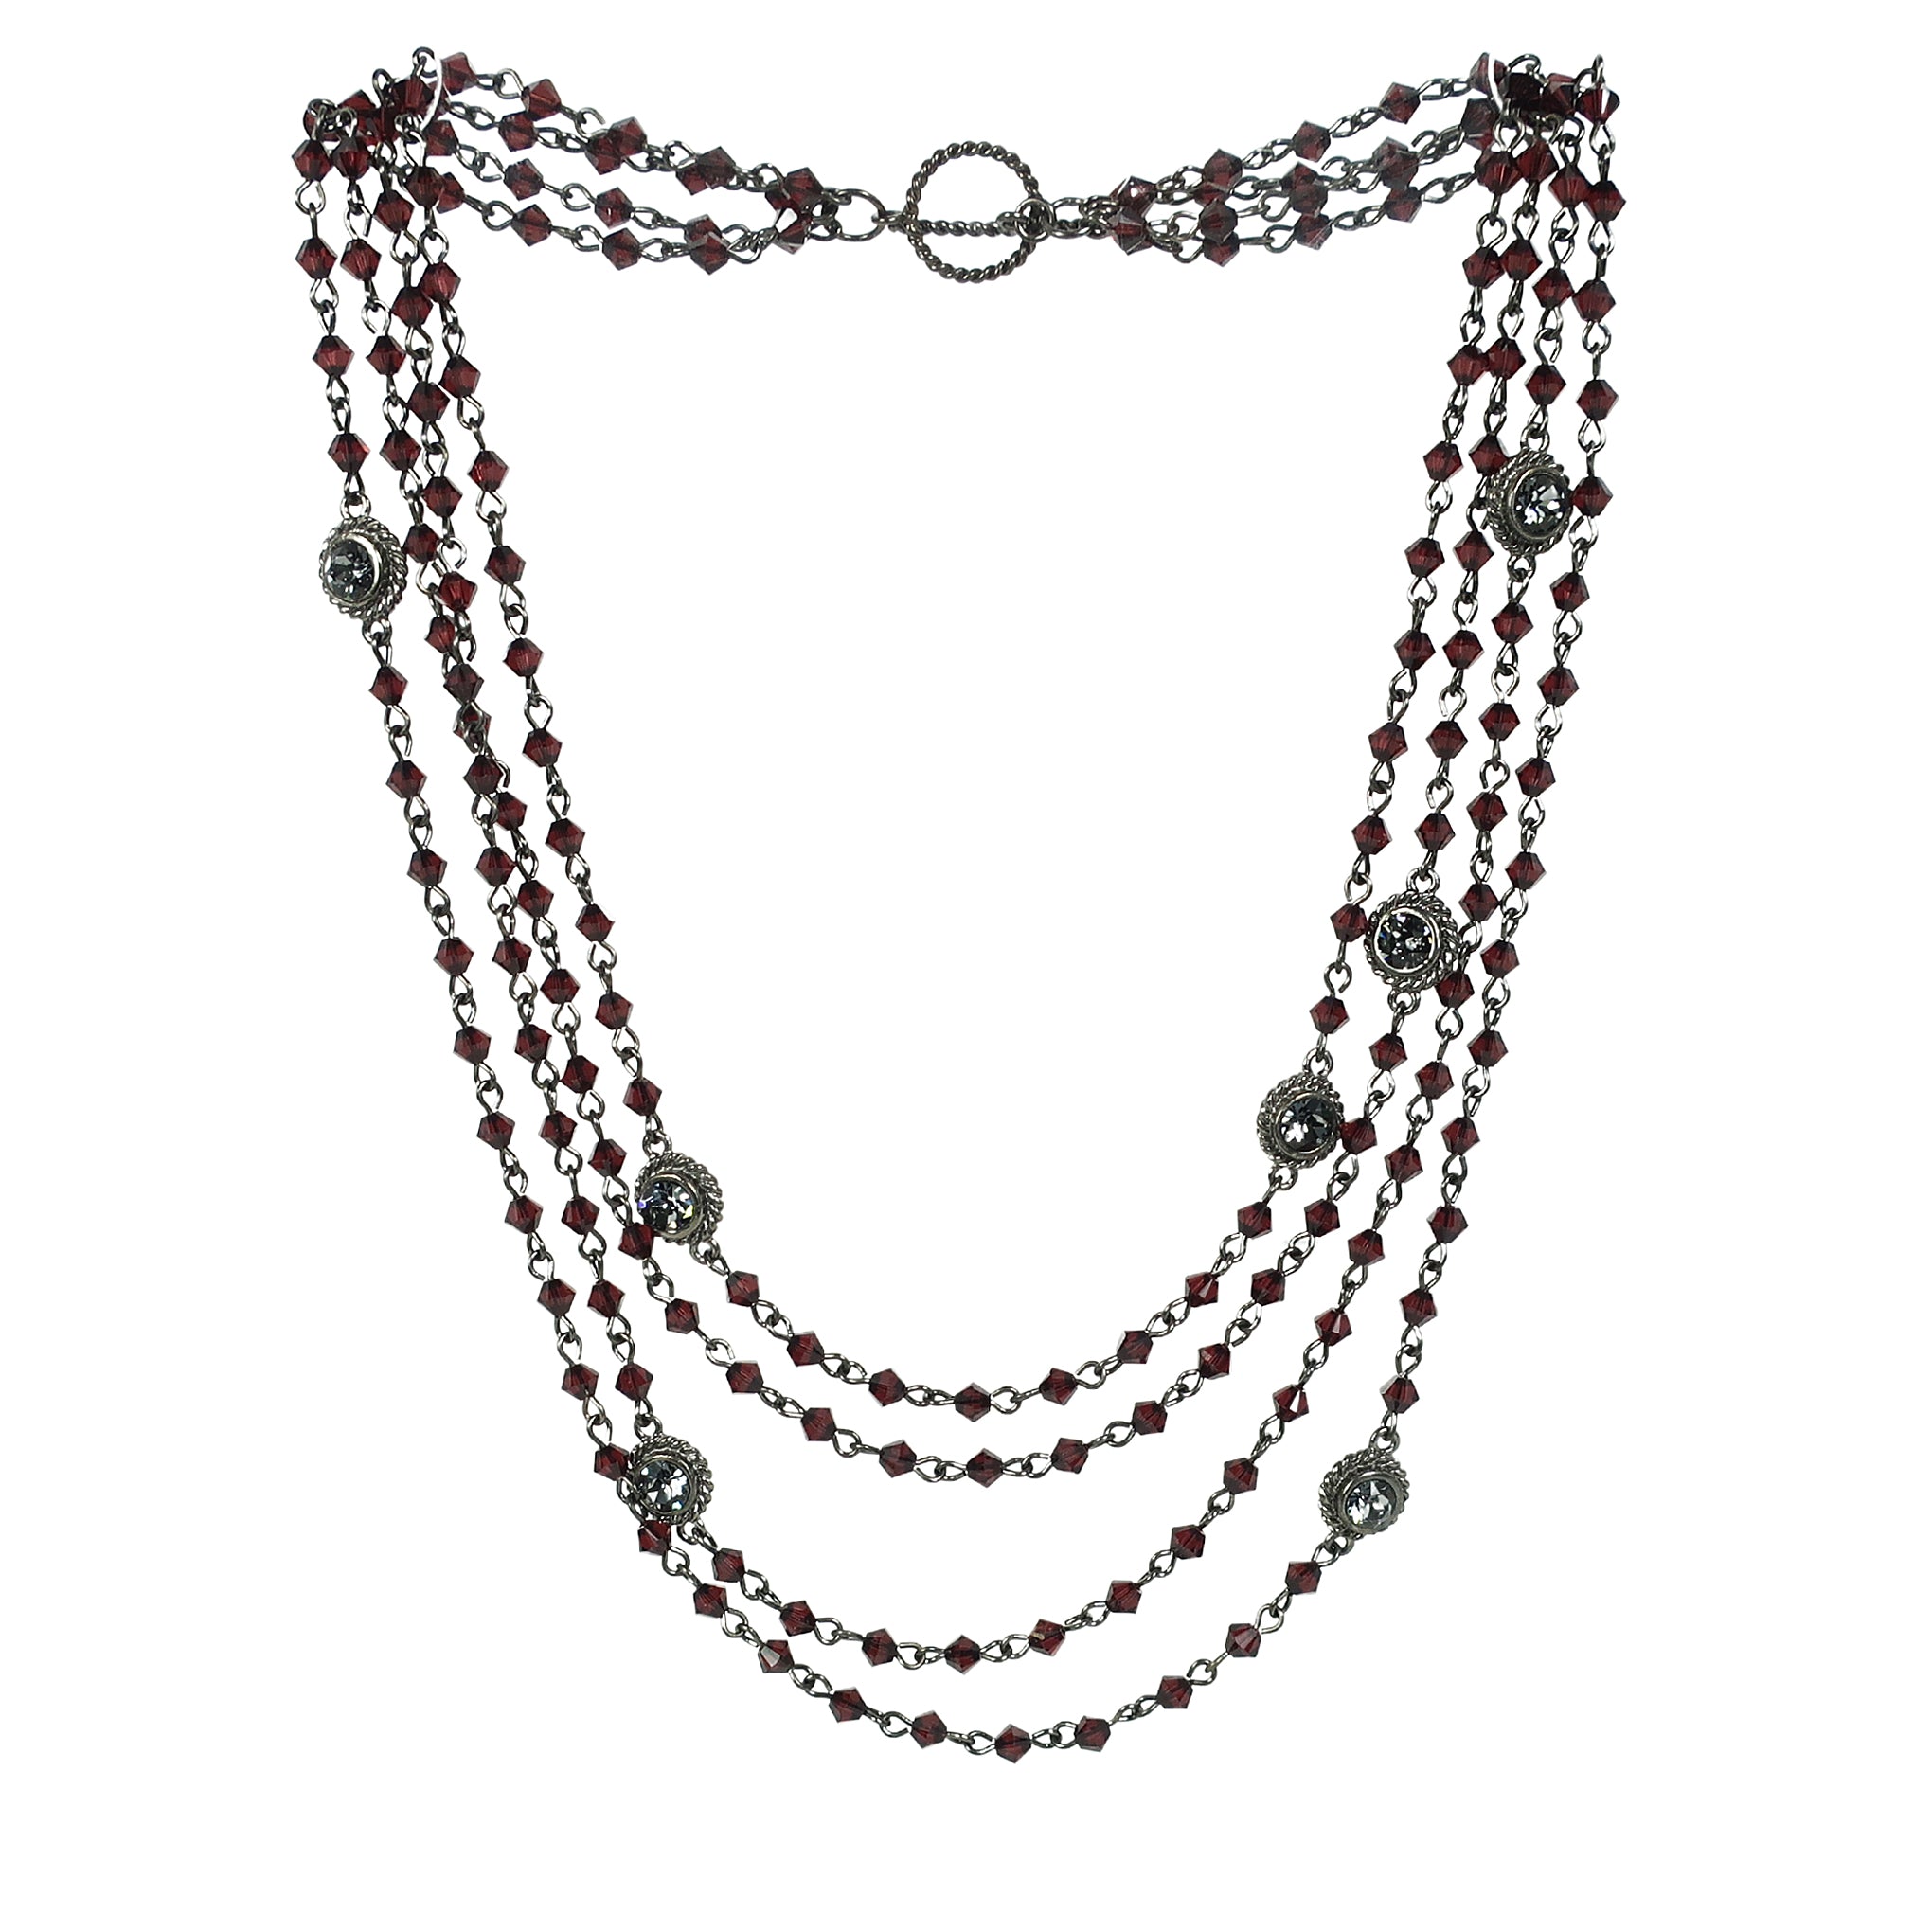 VSA Magdalena Statement Necklace in Gunmetal and 4mm Bicone Burgundy Crystal